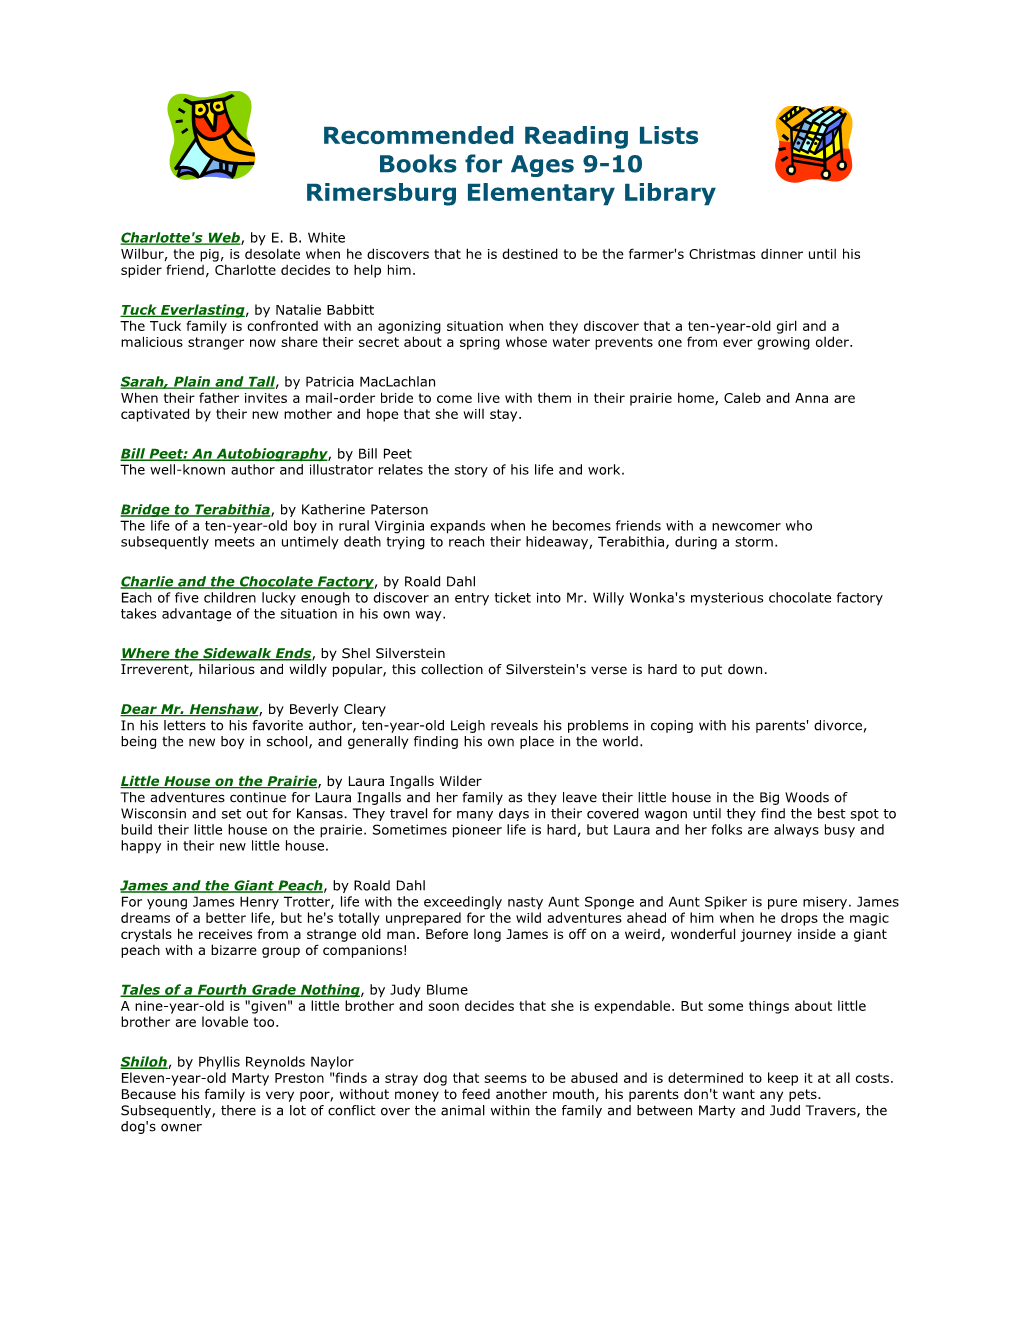 Recommended Reading Lists Books for Ages 9-10 Rimersburg Elementary Library